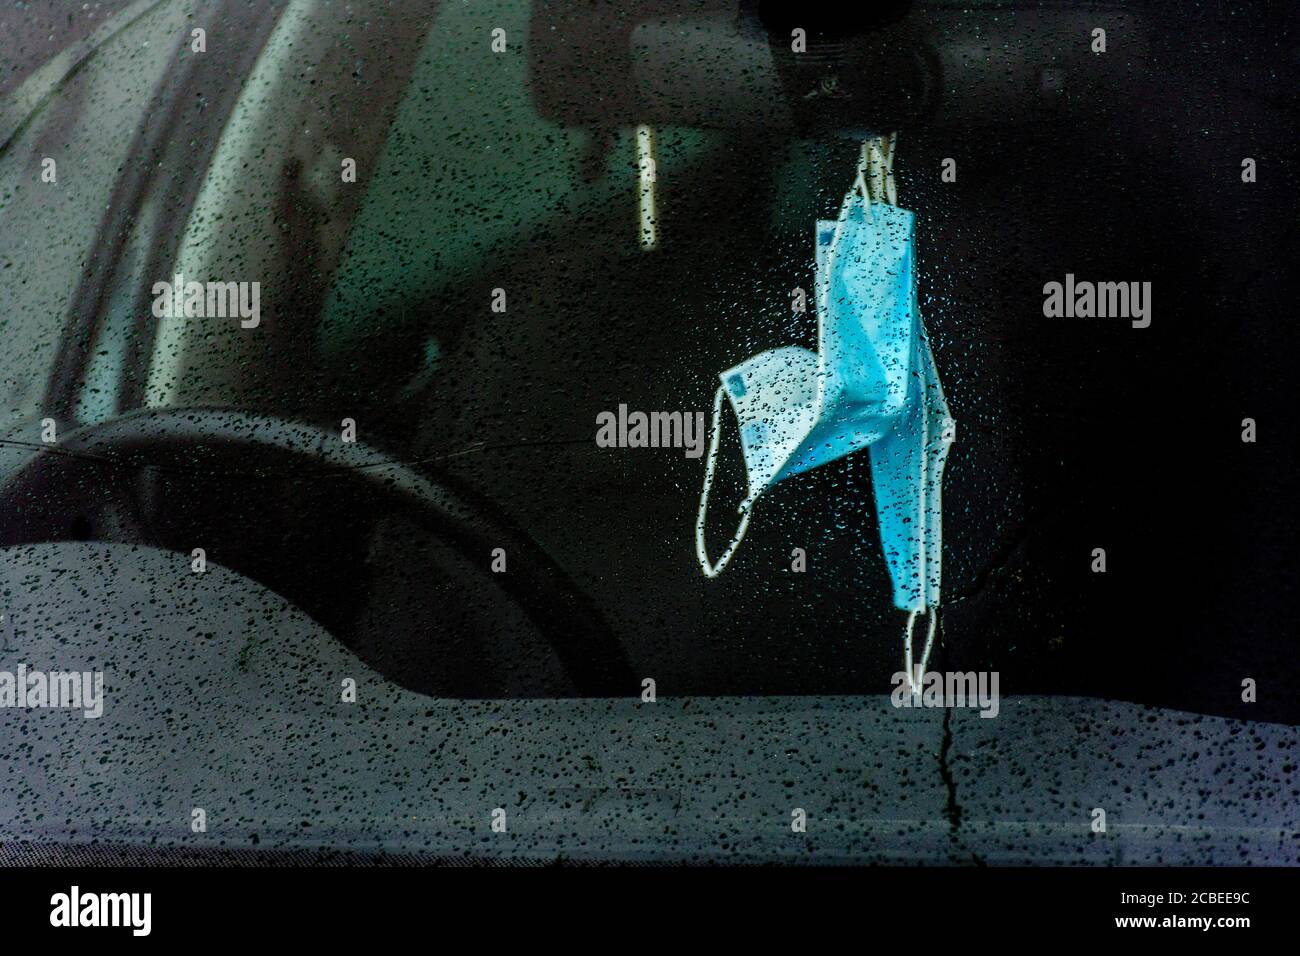 Ardara, County Donegal, Ireland. 13th August 2020. Facemasks are seen hanging from the rearview mirror of a car on a rainy day on the north-west coast. Sign of the times during the Covid-19, Coronavirus pandemic. Stock Photo